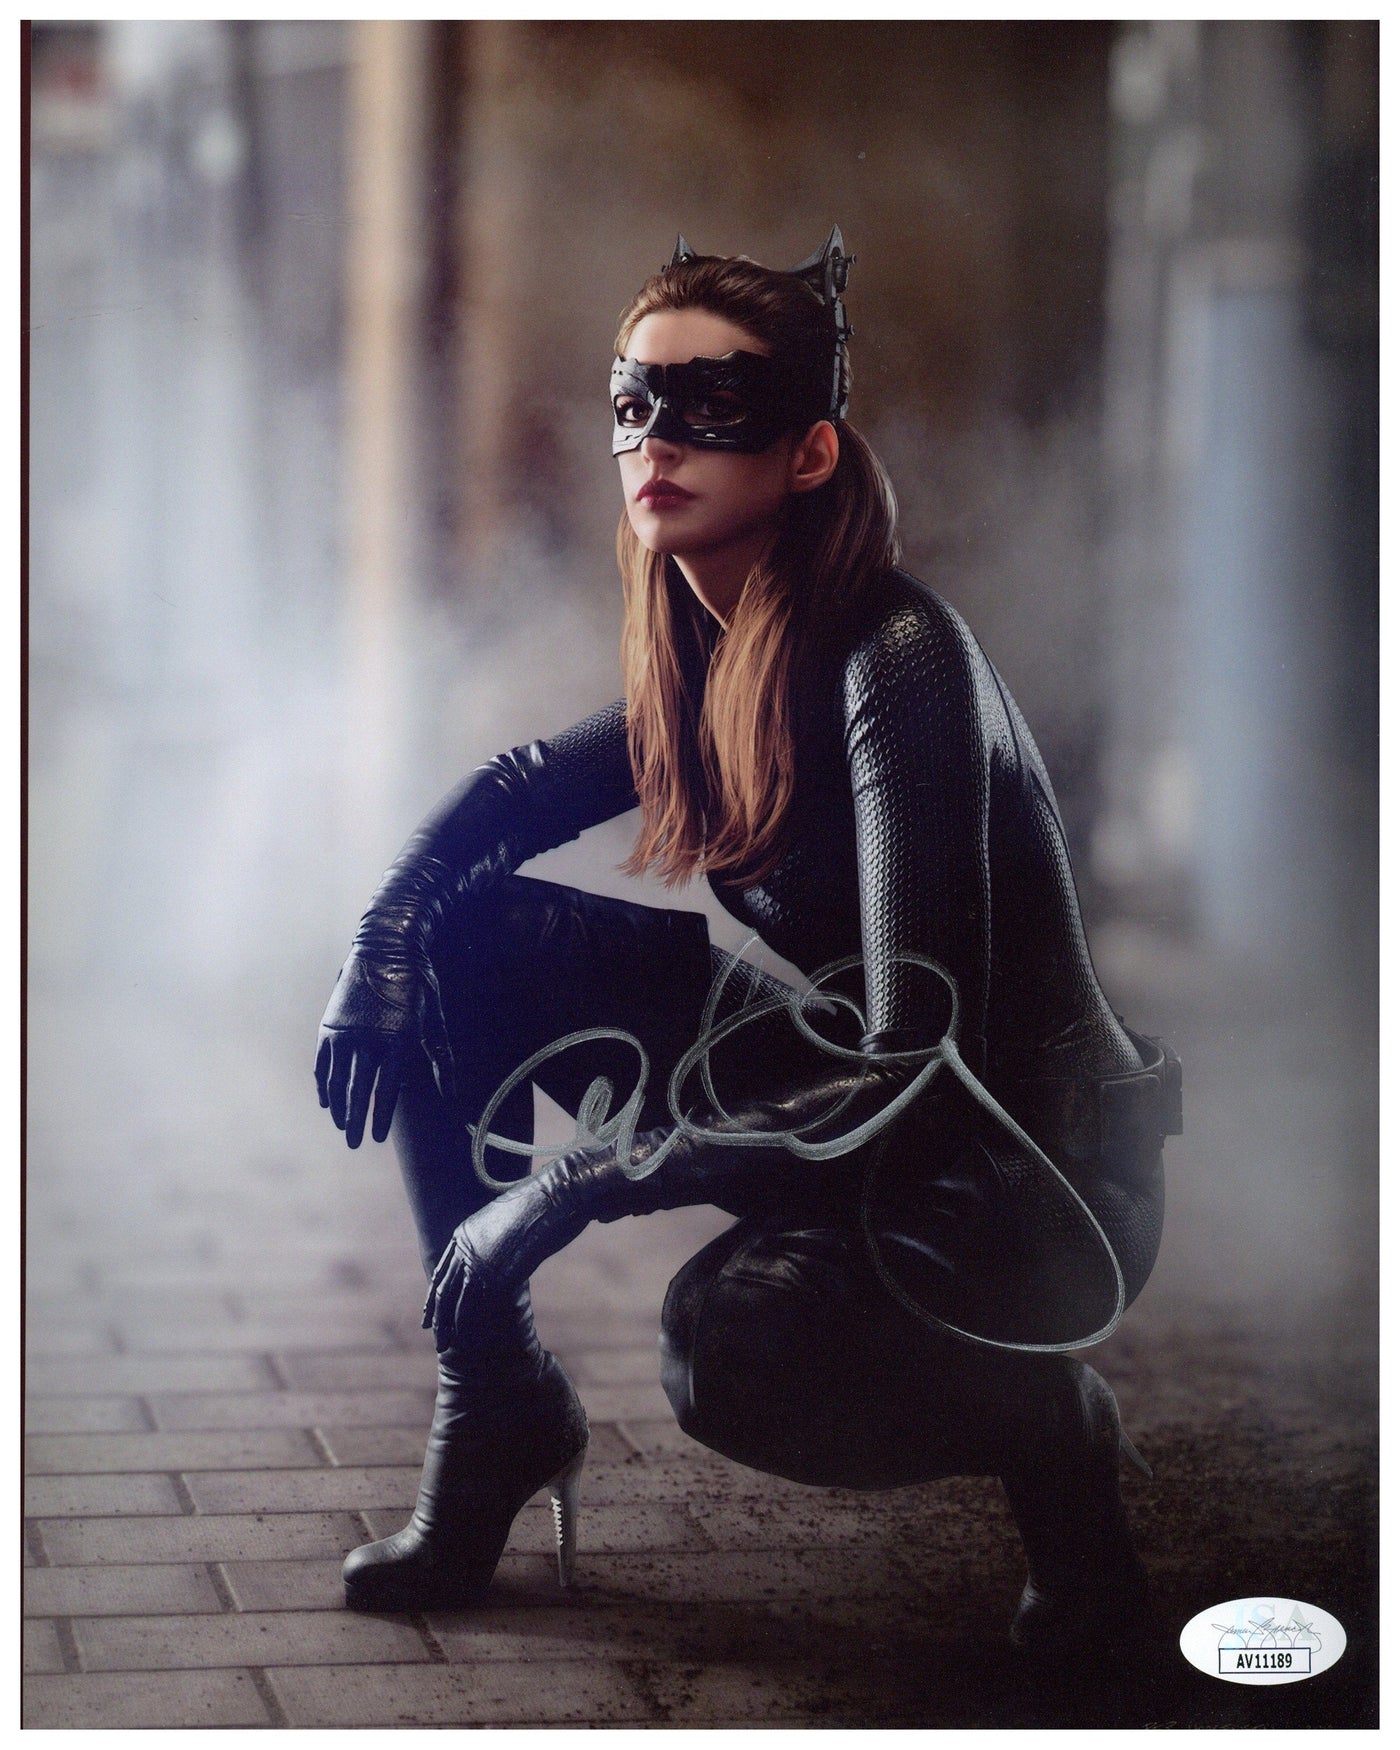 Anne Hathaway Signed 8x10 Photo The Dark Knight Rises Autographed JSA COA